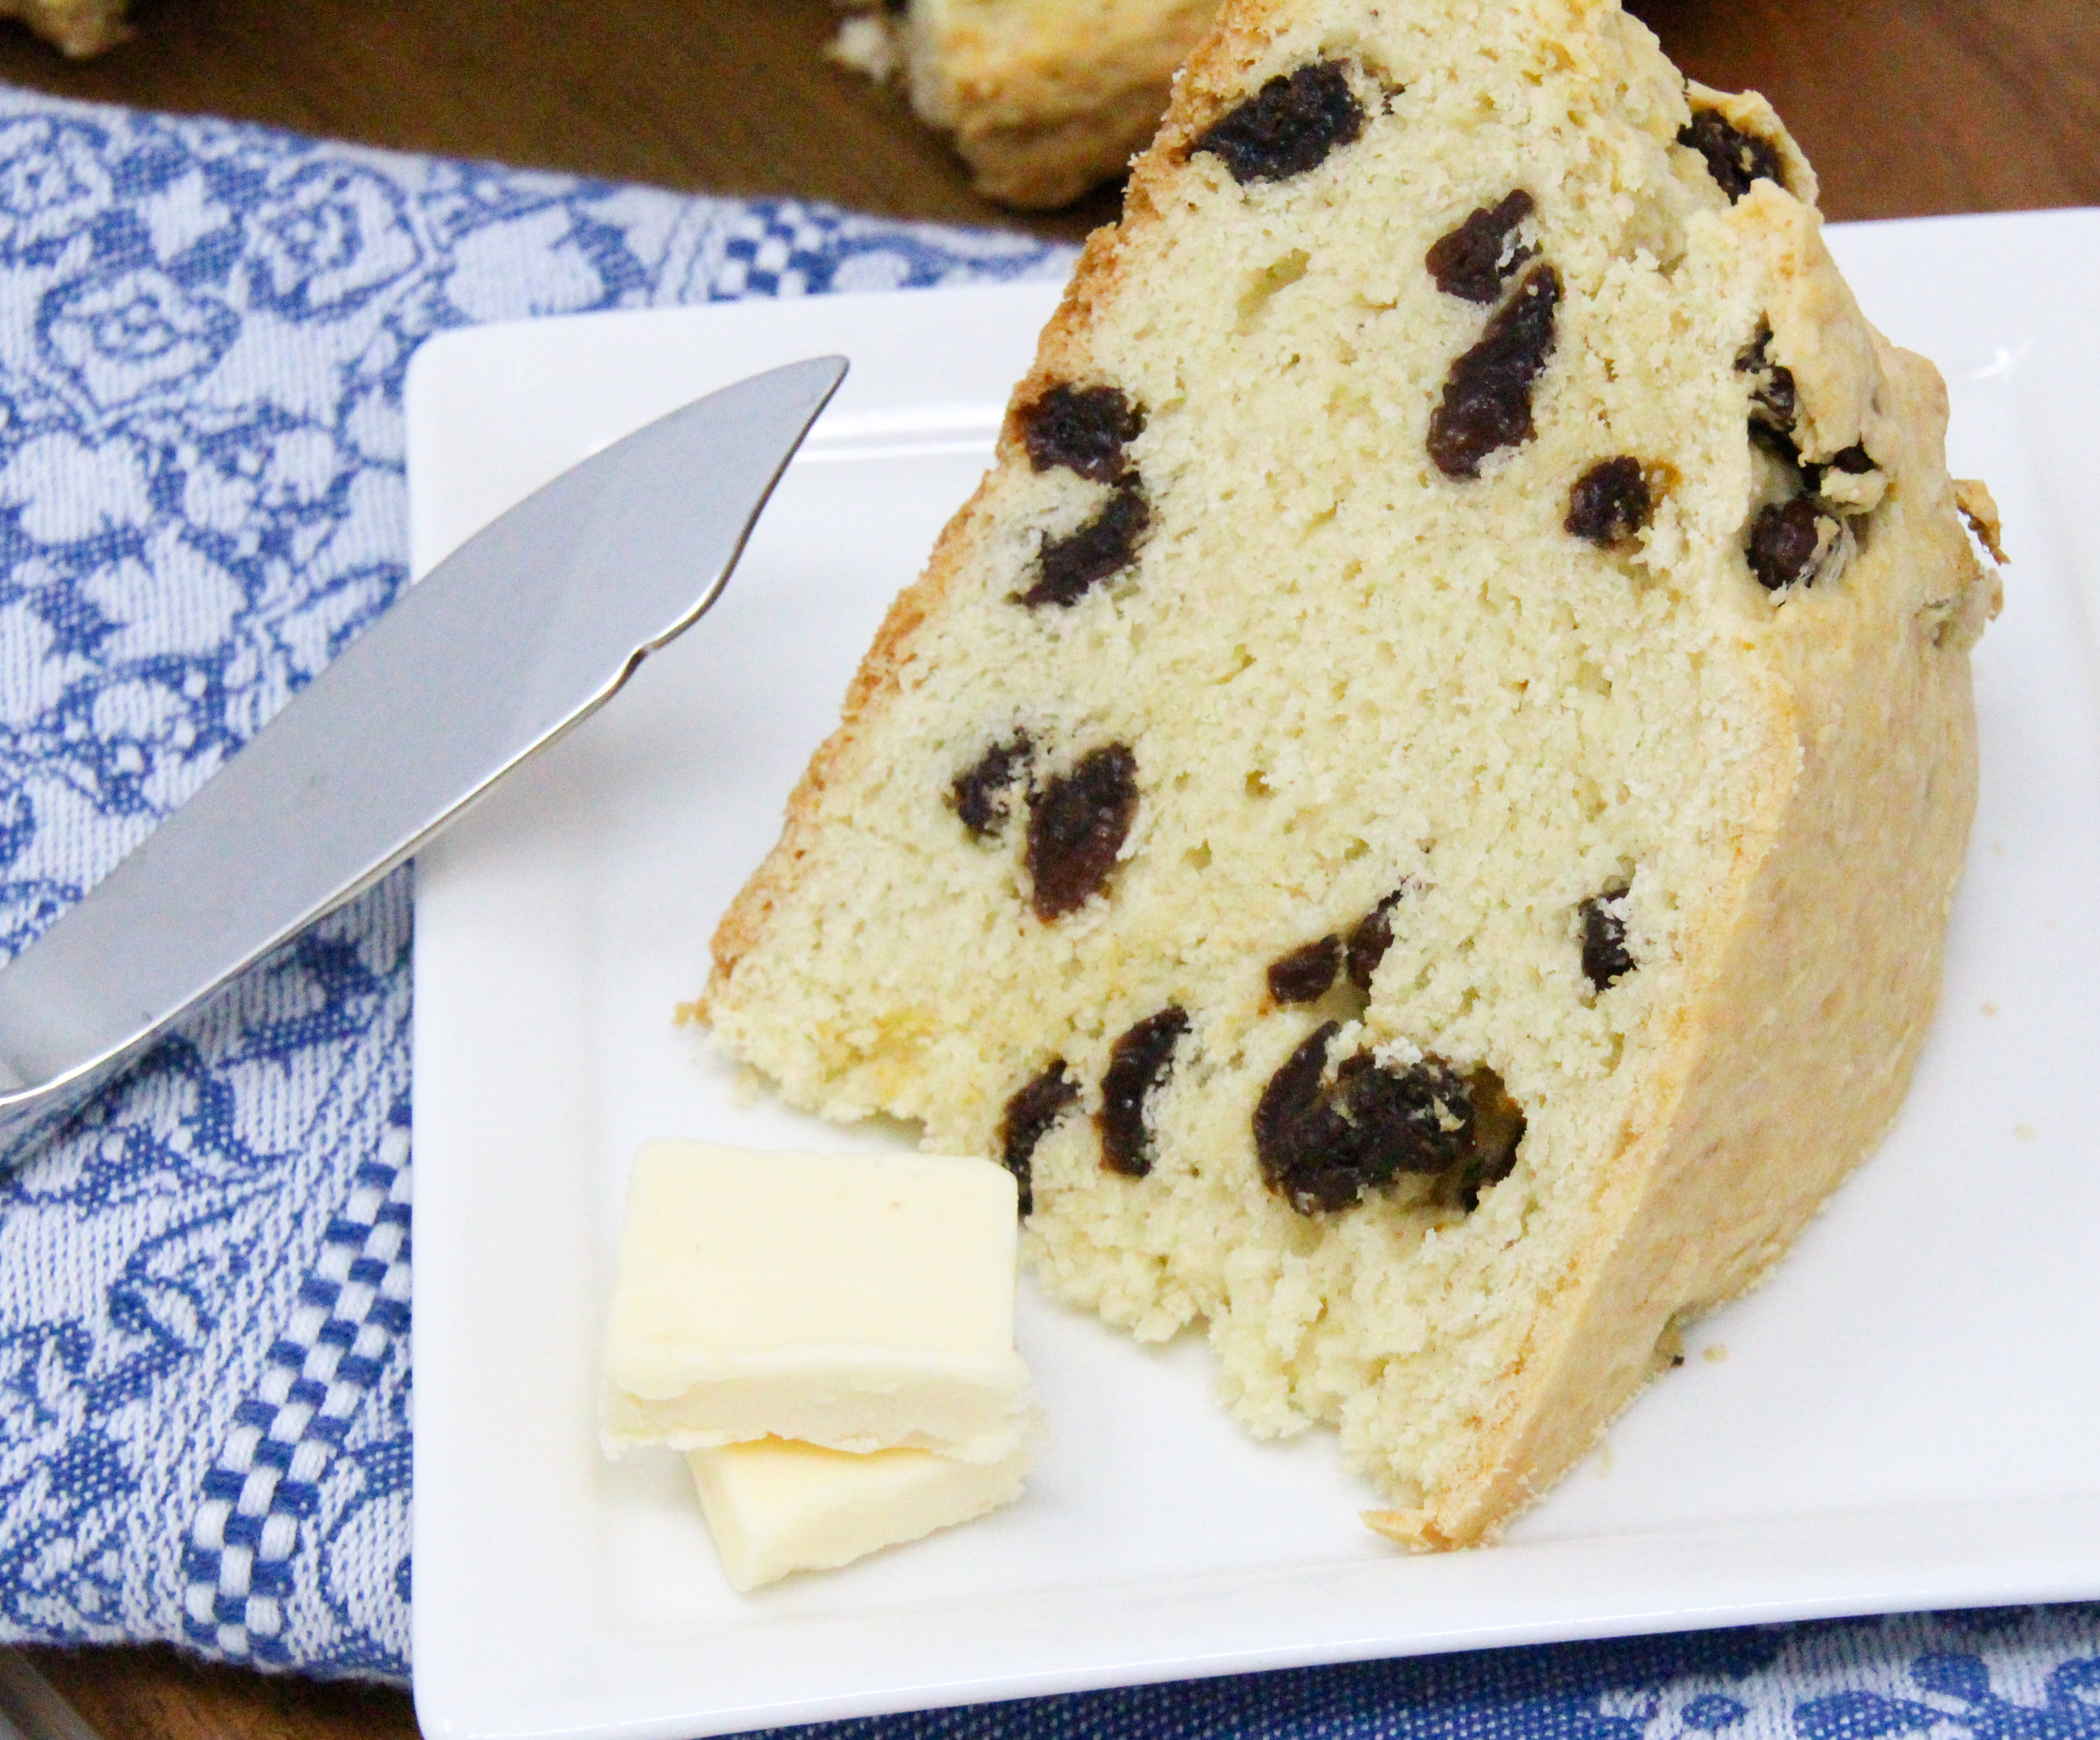 Delicious and easy to make, this Irish Soda Bread comes together quickly using only one-bowl. Toasted and slathered with butter or served with a bowl of soup, this Irish treat is perfect any time of the year. Recipe shared with permission granted by Barbara Ross, author of Irish Coffee Murder. 